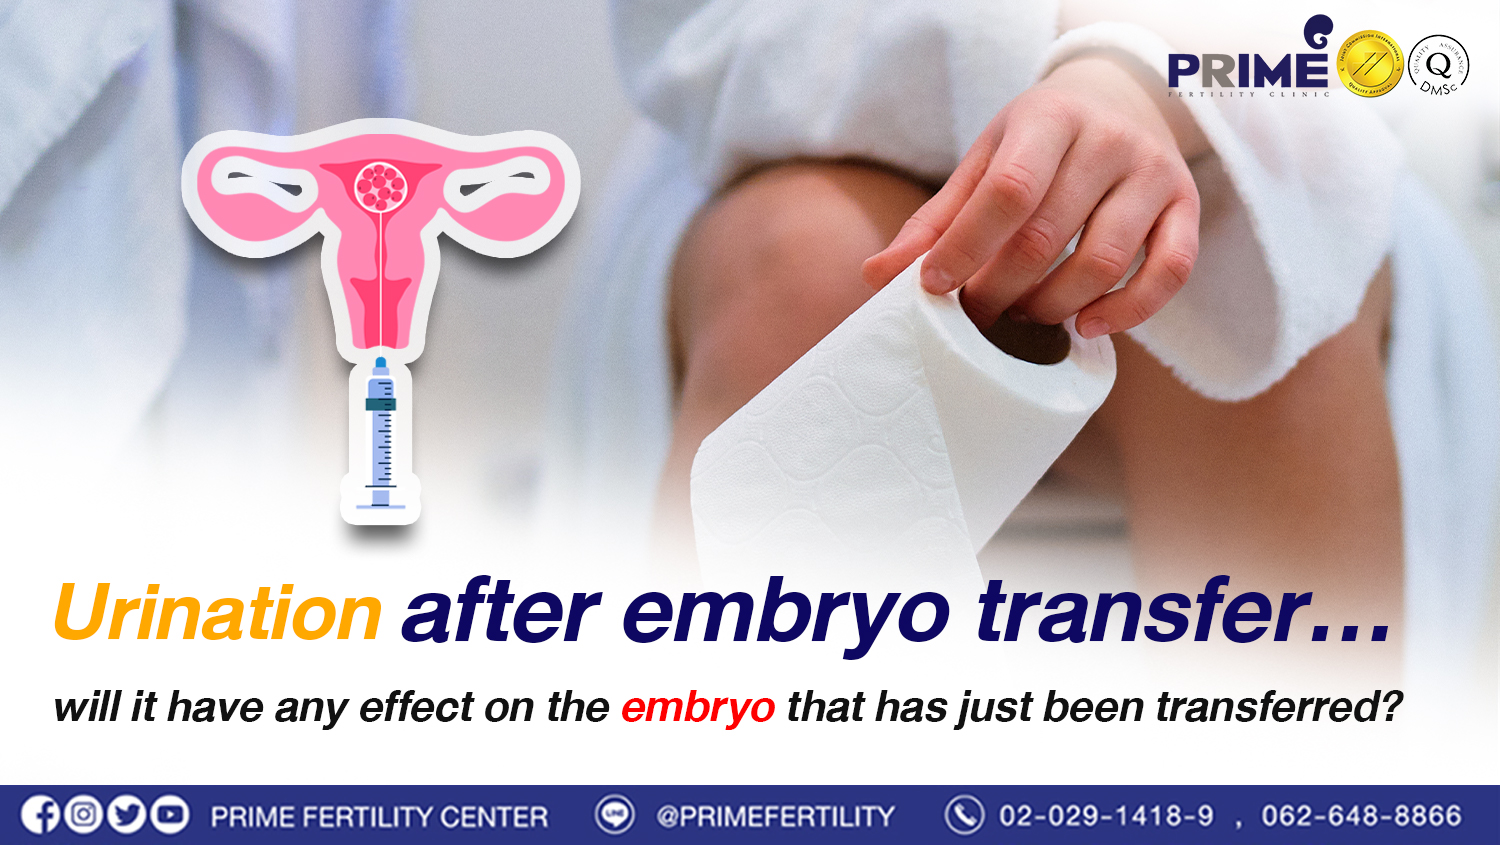 Urination after embryo transfer... will it have any effect on the embryo that has just been transferred?